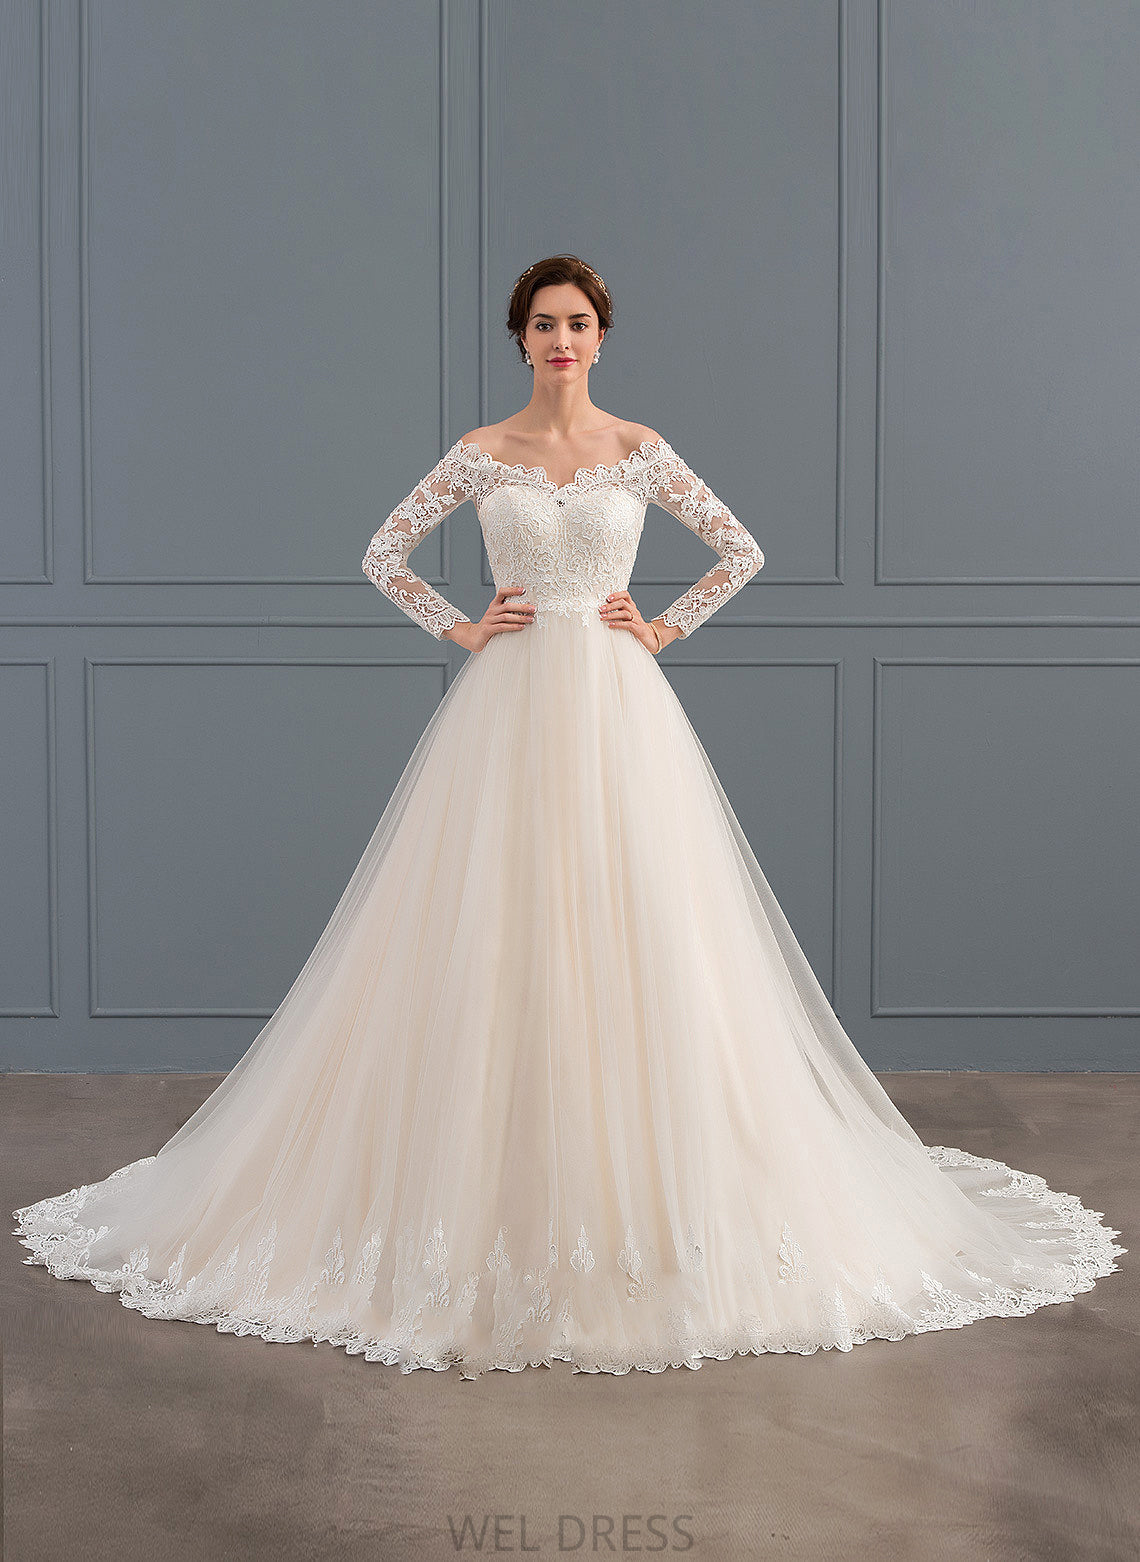 Train Dress Off-the-Shoulder Tulle Lace Wedding Dresses Chapel Ball-Gown/Princess Wedding Natalie